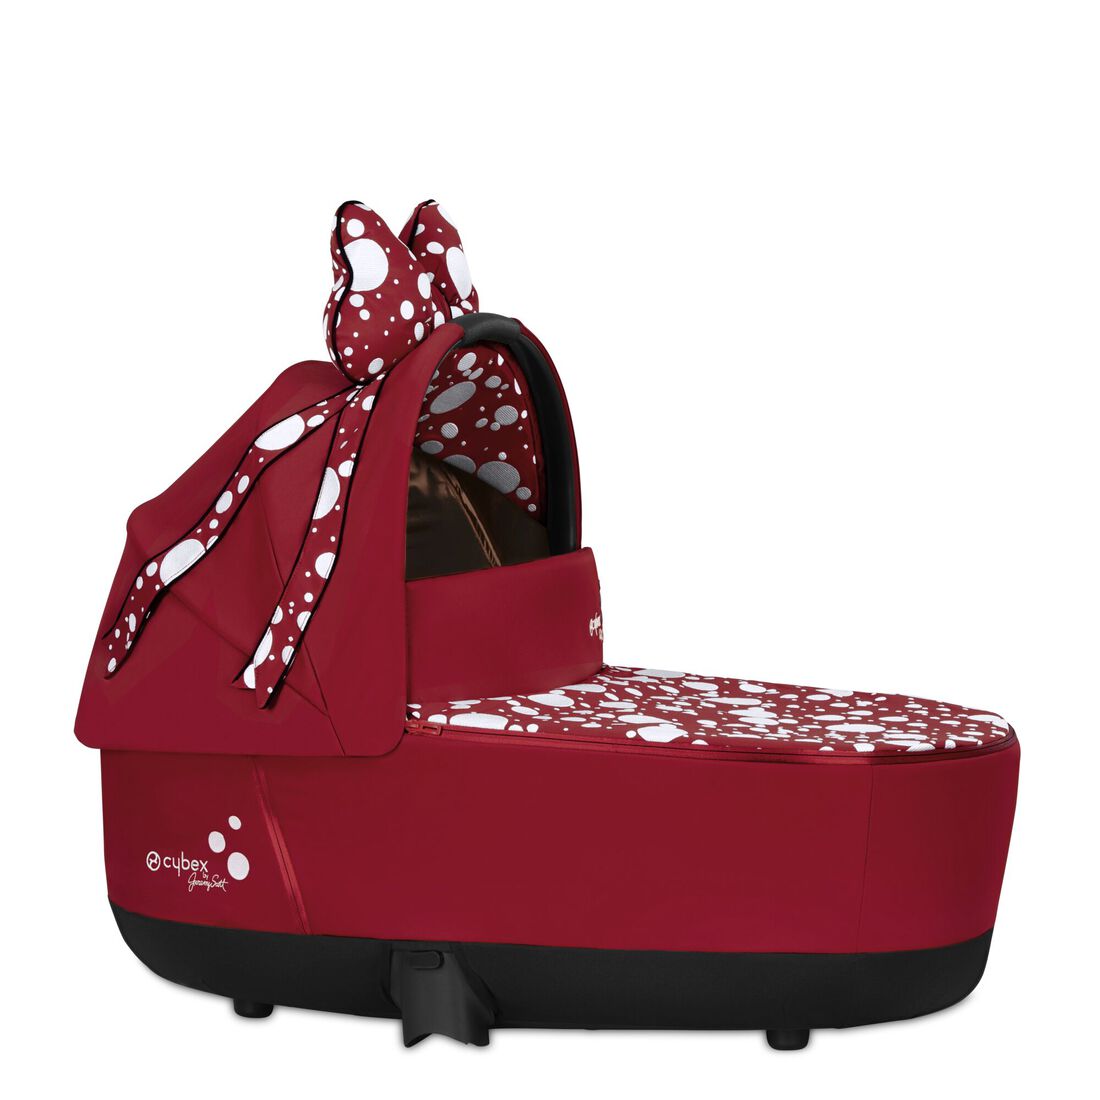 CYBEX Nacelle Lux Priam 3 - Petticoat Red in Petticoat Red large numéro d’image 1